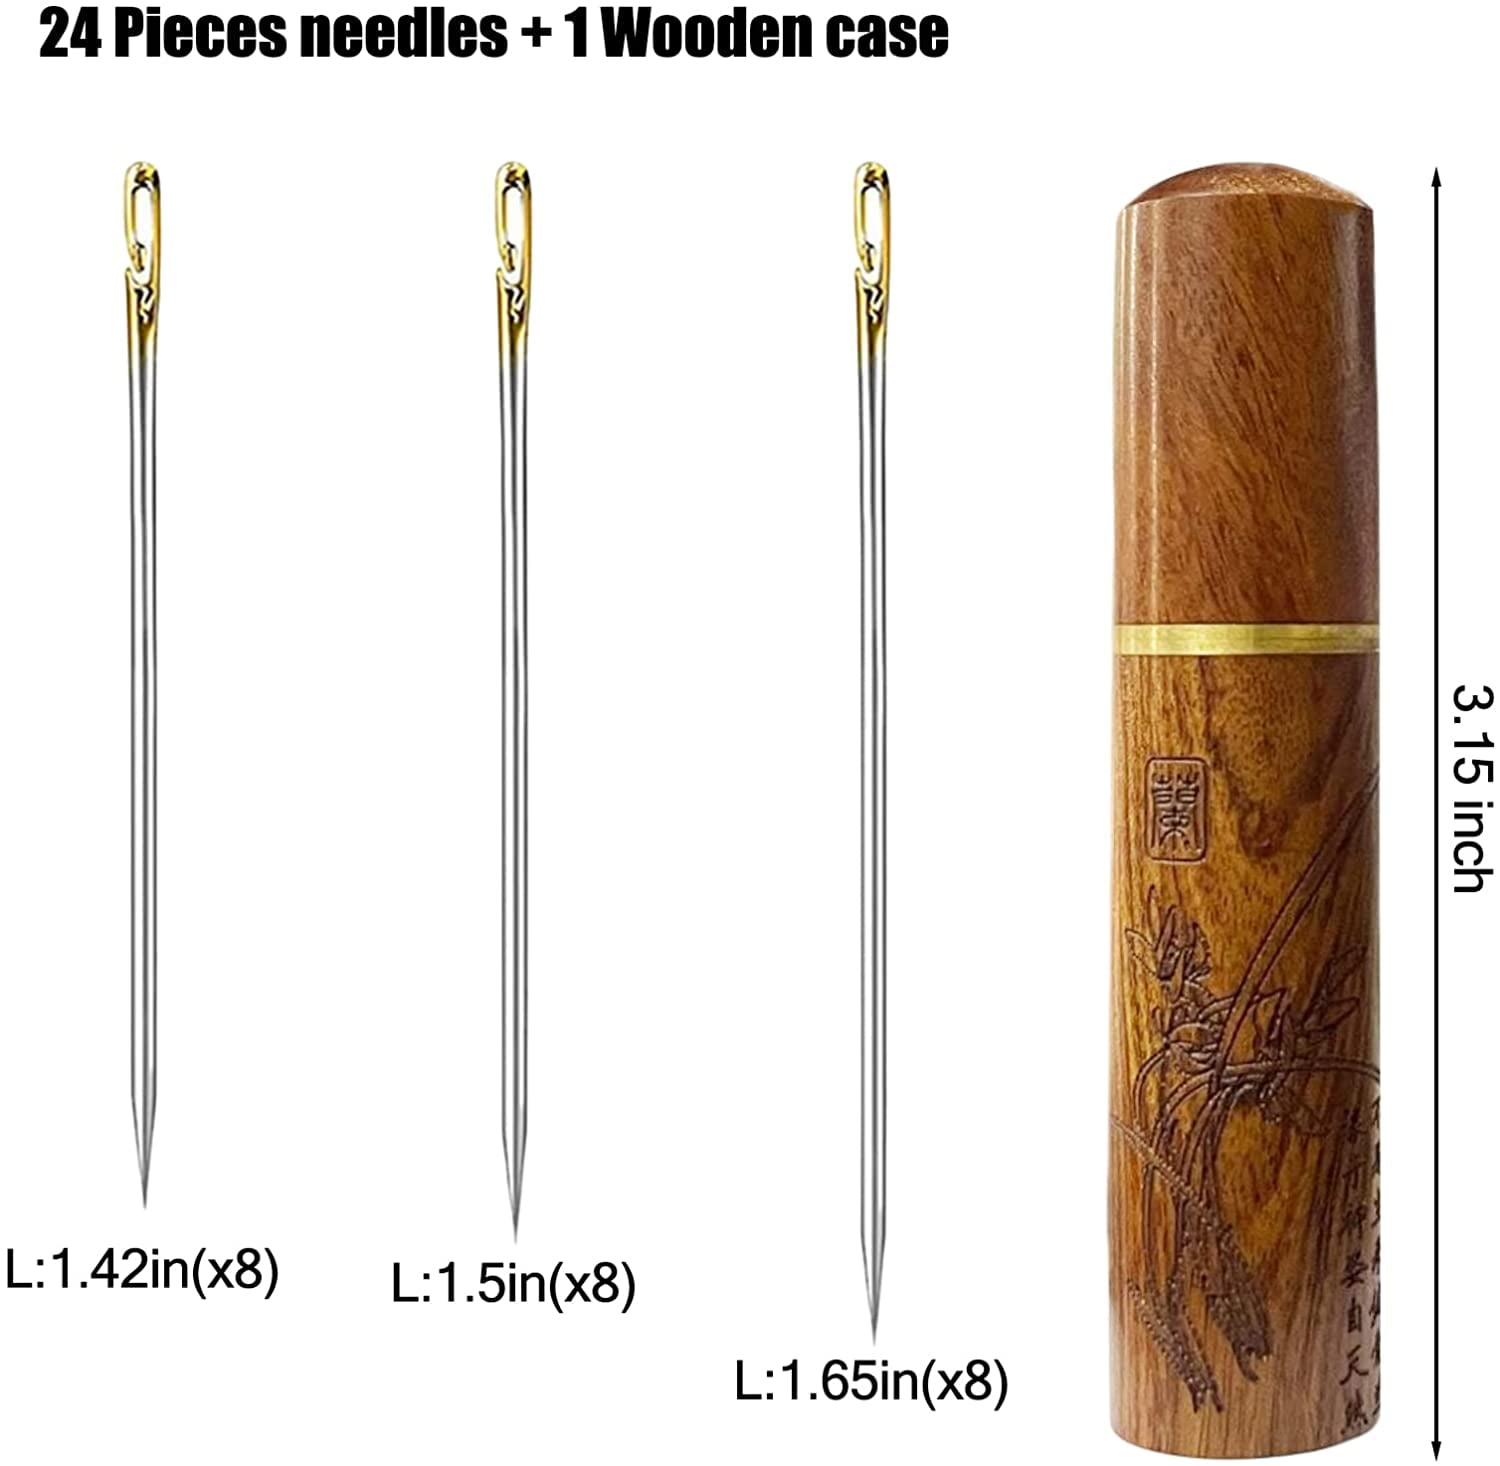 24Pcs Self Threading Needles, Easy Threading Needles for Sewing, Hand  Sewing Needles with Wooden Needle Case (Gold)